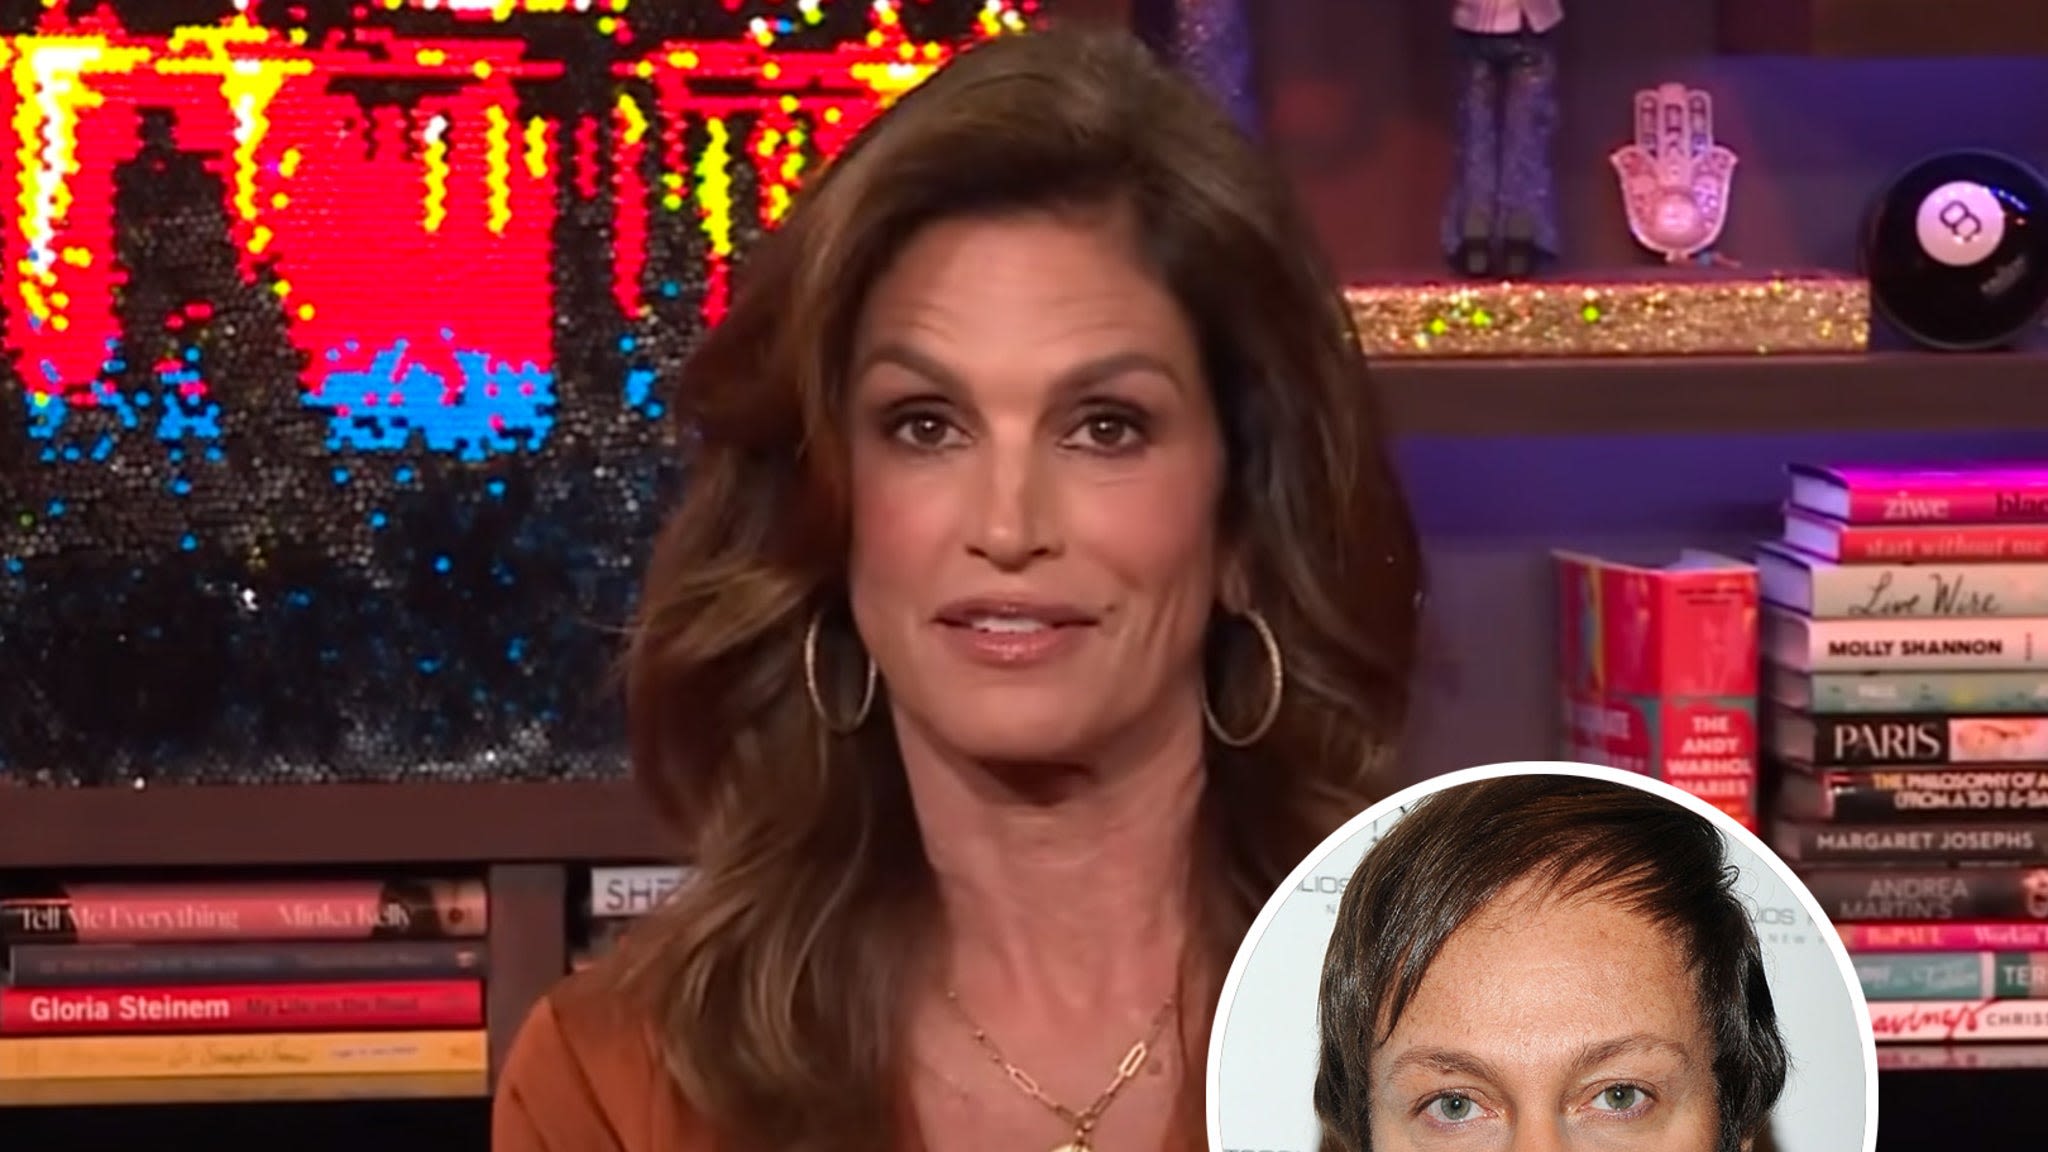 Cindy Crawford Apologizes to Greek Fashion Designer She Said She'd 'Never Work with Again'